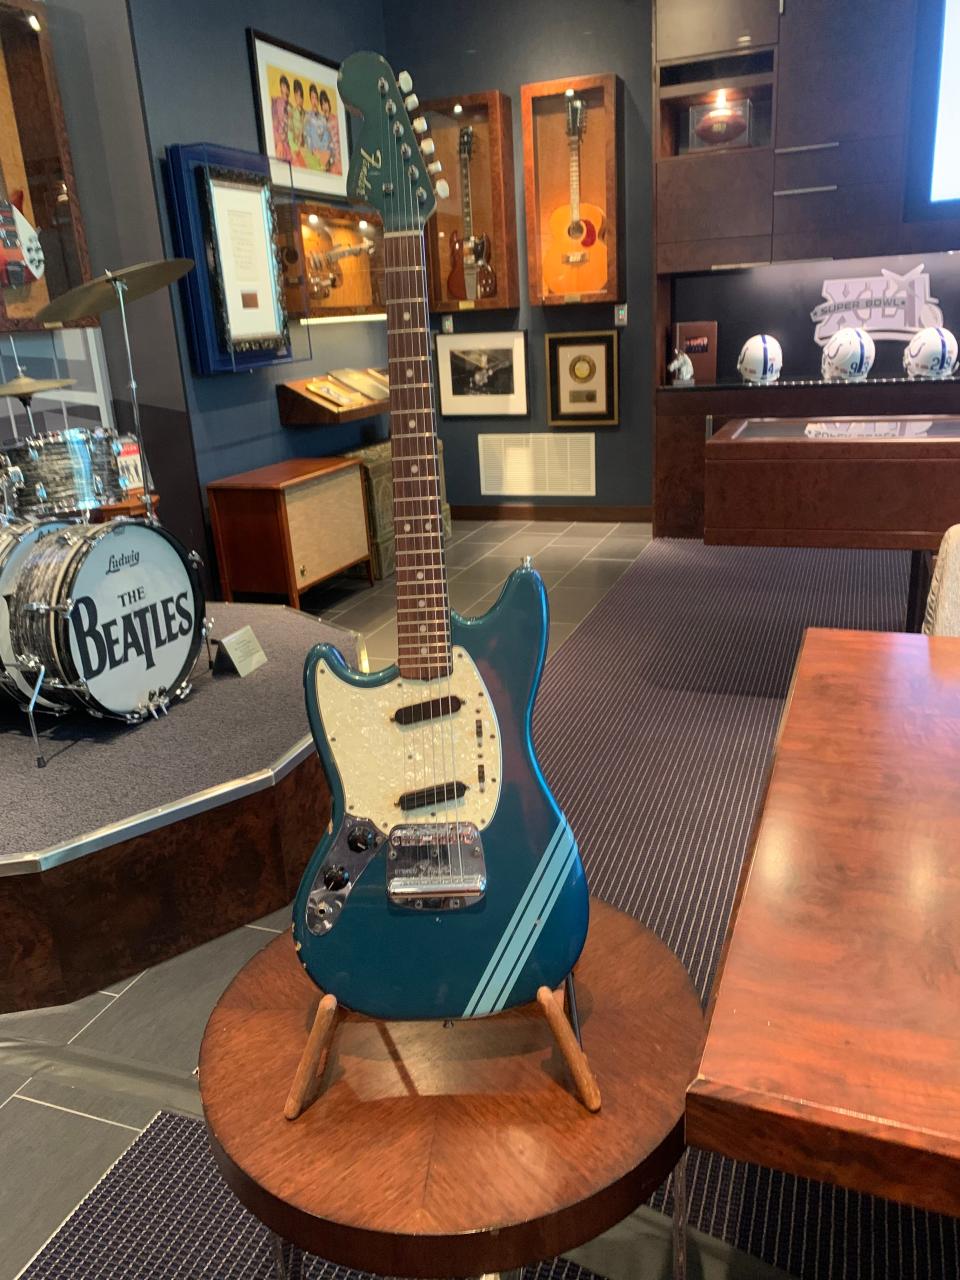 The Indianapolis Colts are helping to auction off Kurt Cobain's guitar from Nirvana's music video, "Smells Like Teen Spirit," in order to help raise money to address mental health.